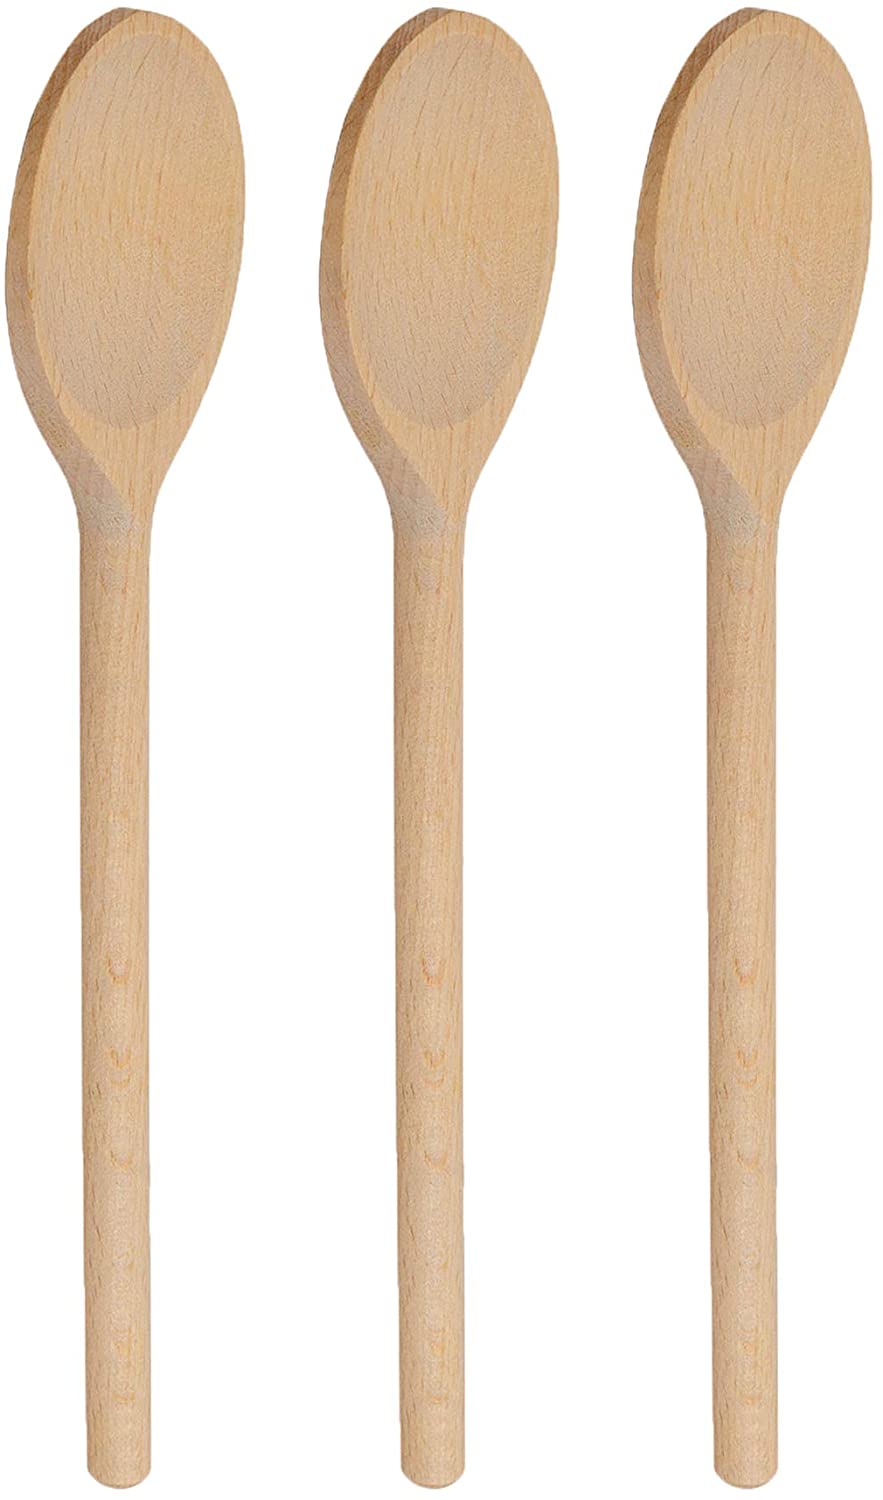 https://www.dontwasteyourmoney.com/wp-content/uploads/2020/05/bicb-long-handle-cooking-mini-oval-wooden-spoons-wooden-spoons.jpg